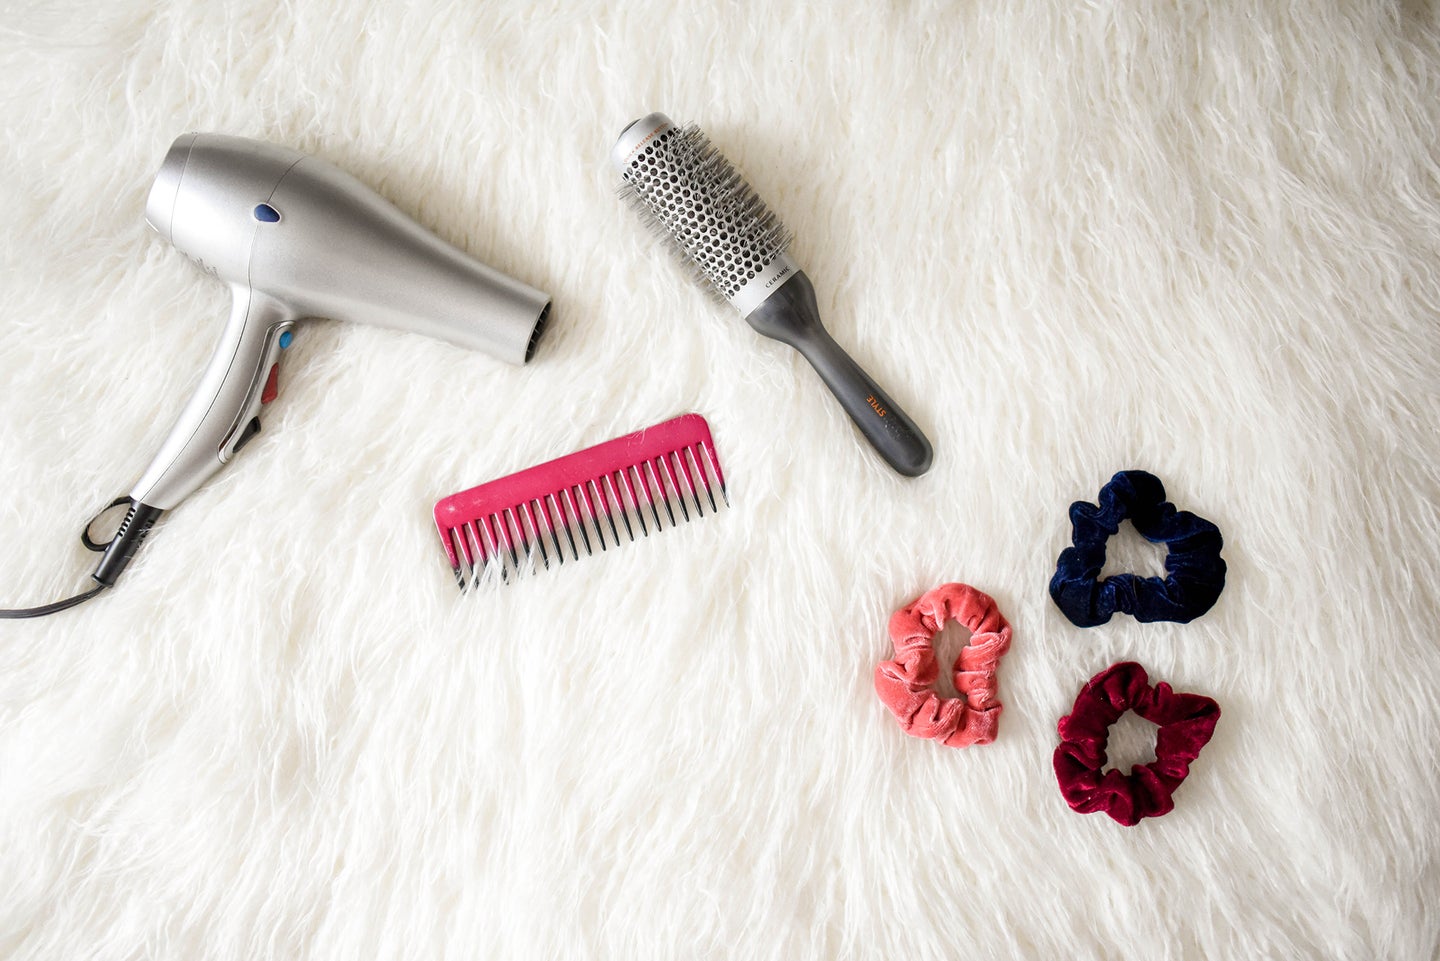 hair dryer, comb, brush, and scrunchies on a furry white rug